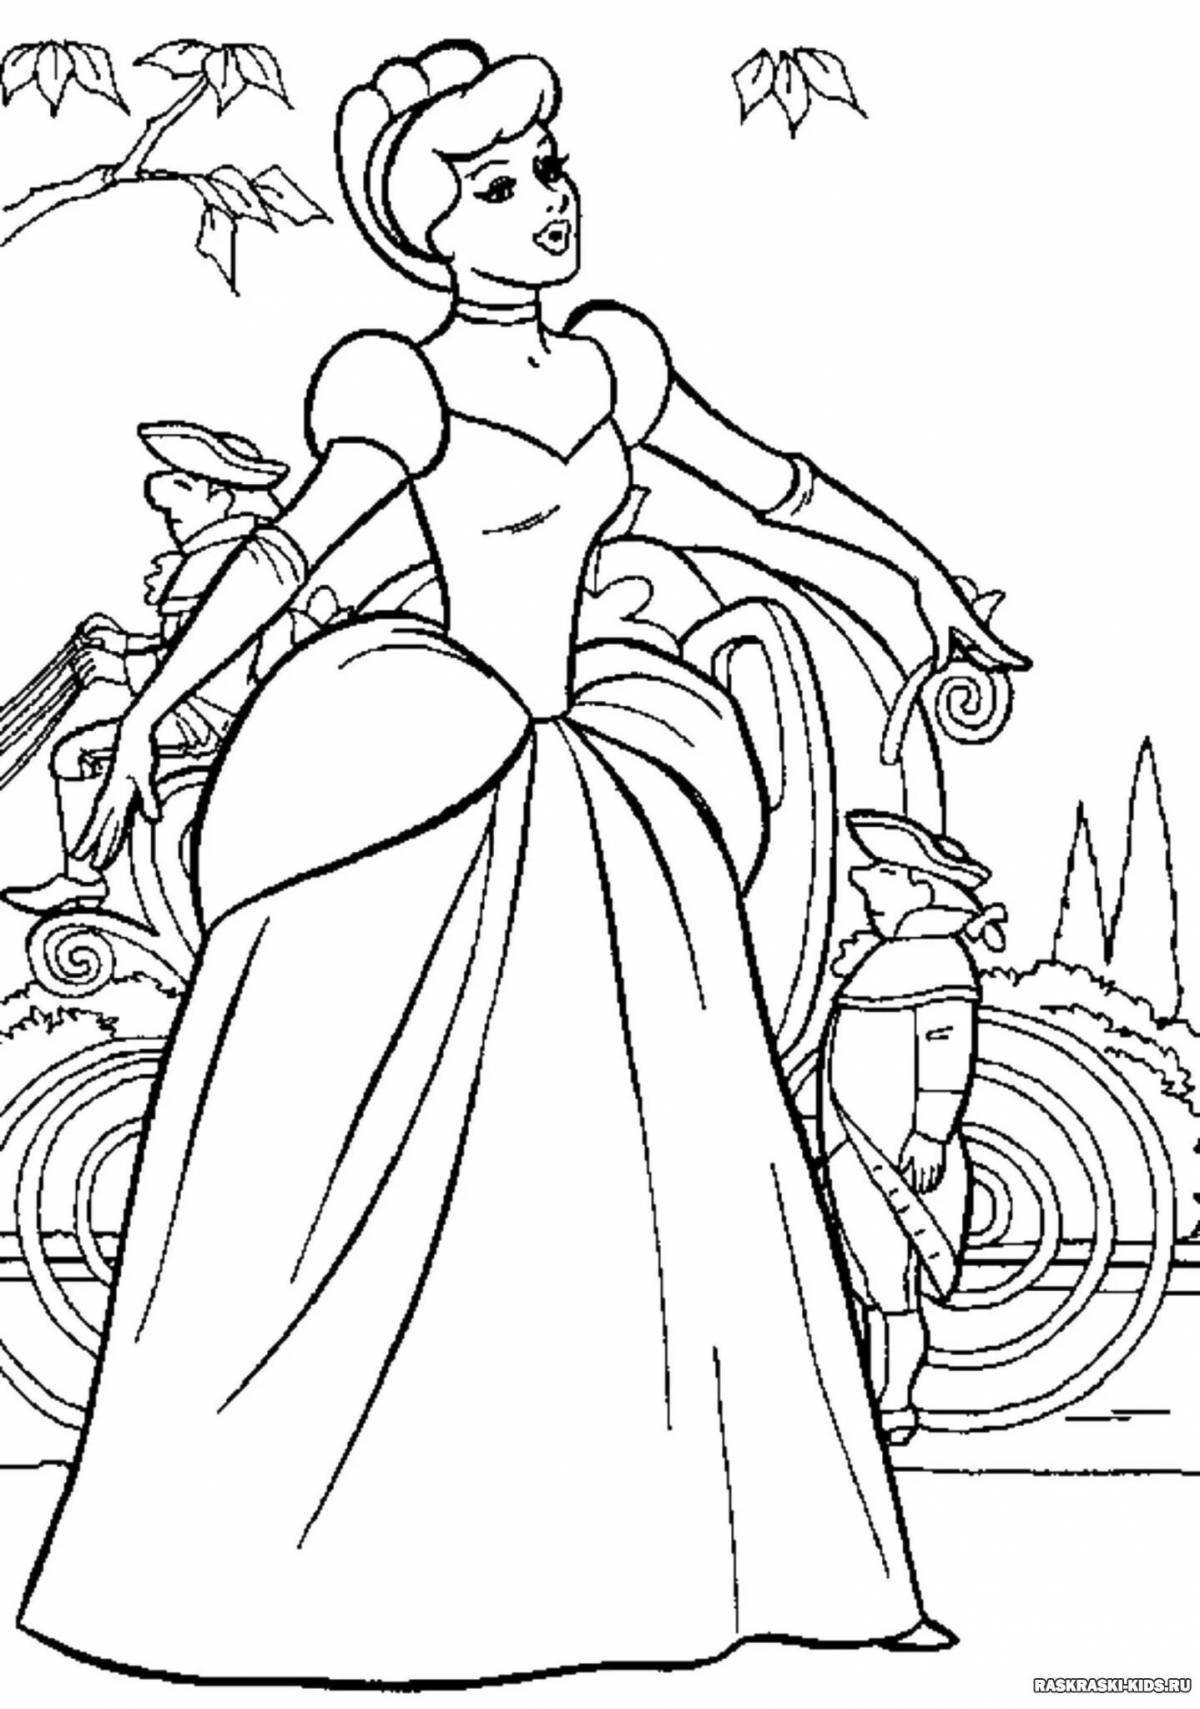 Charming Cinderella coloring book for 5-6 year olds